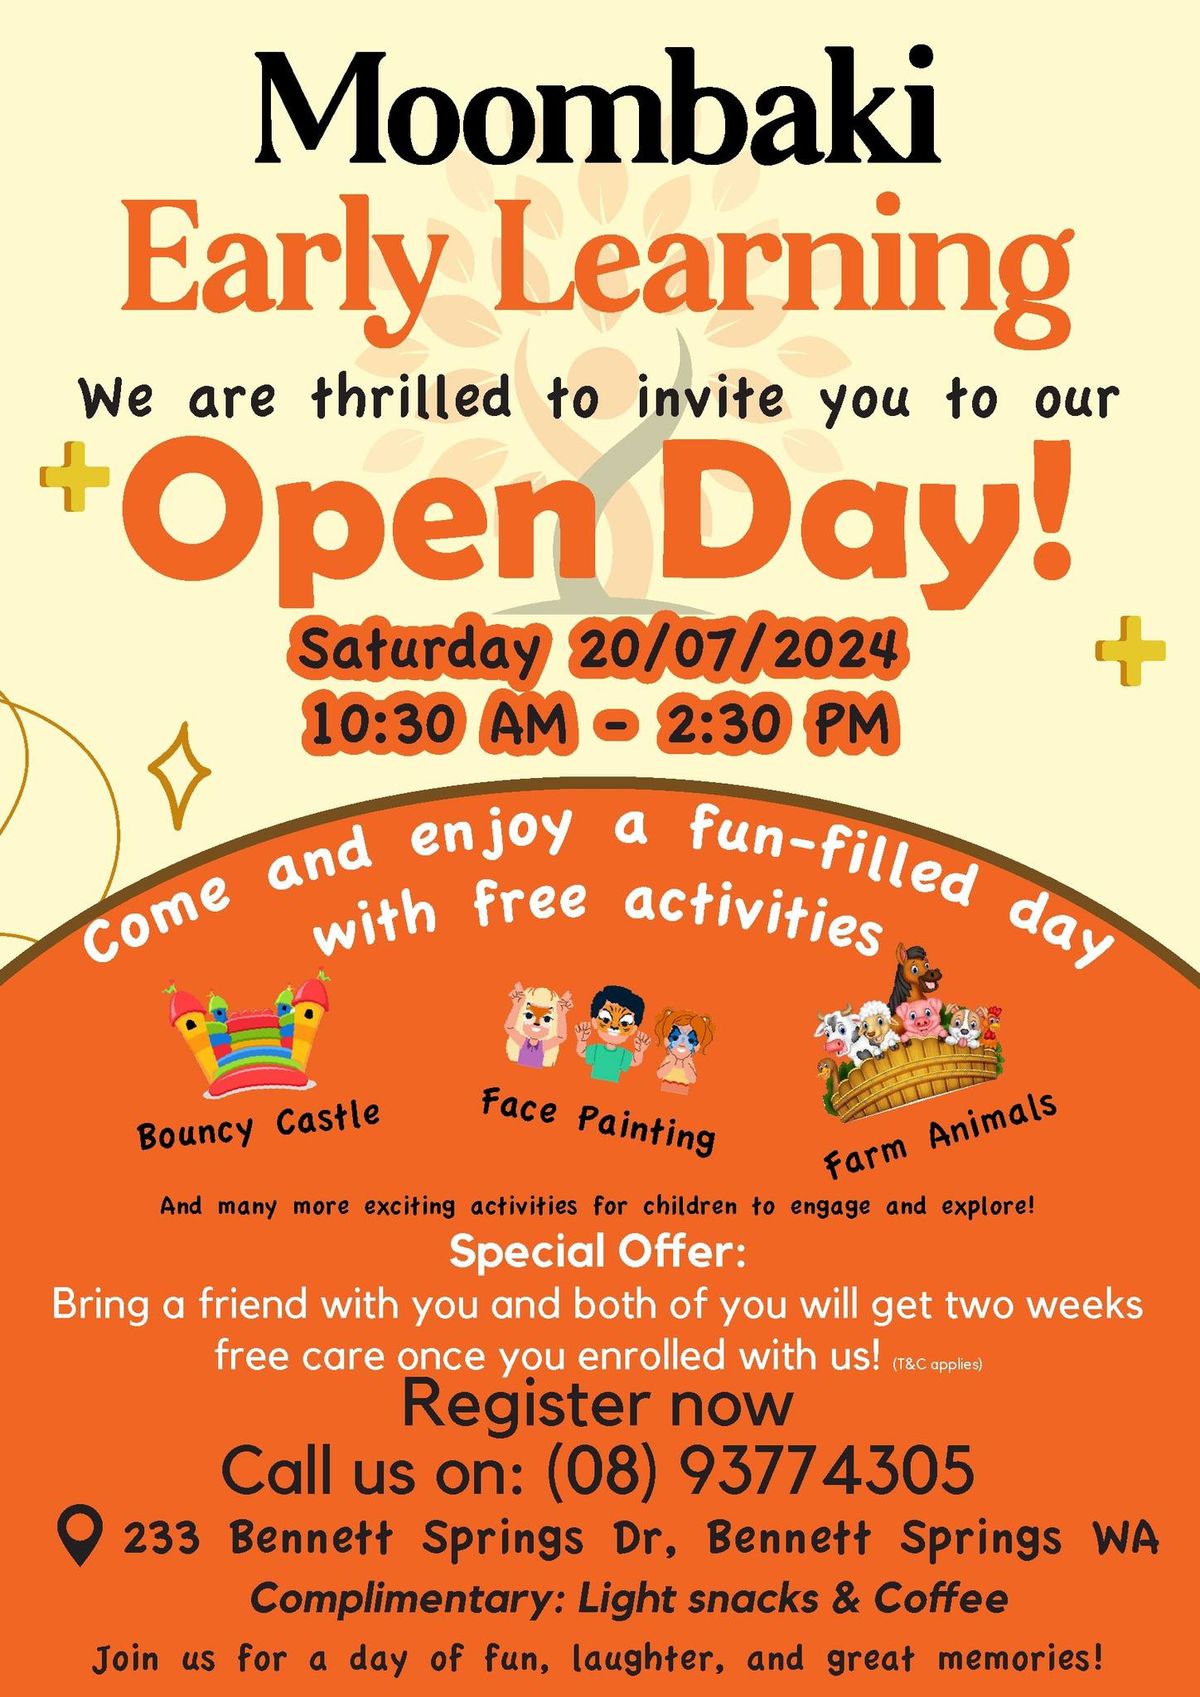 Join Us for Our Exciting Open Day!